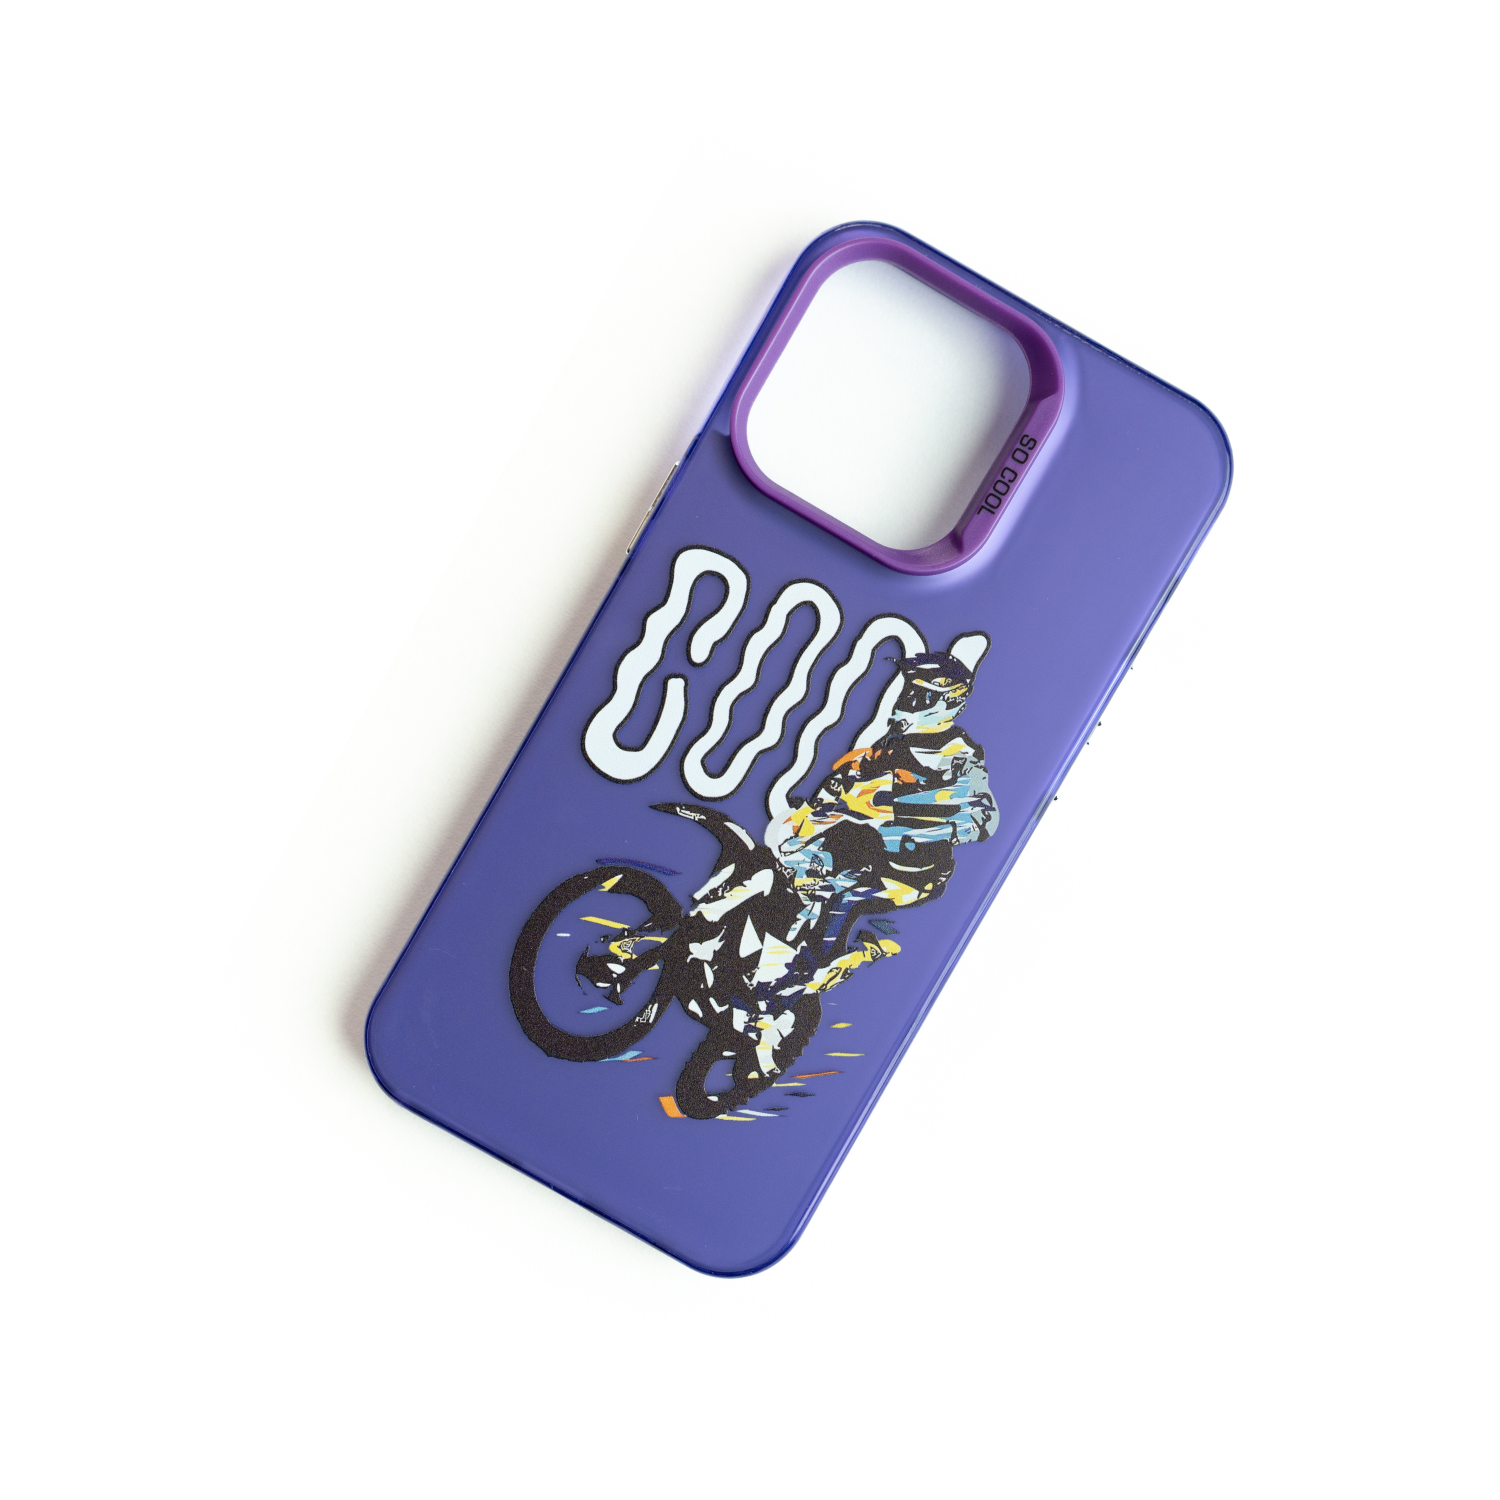 Dirt Bike - Iphone Case - Cult Collection